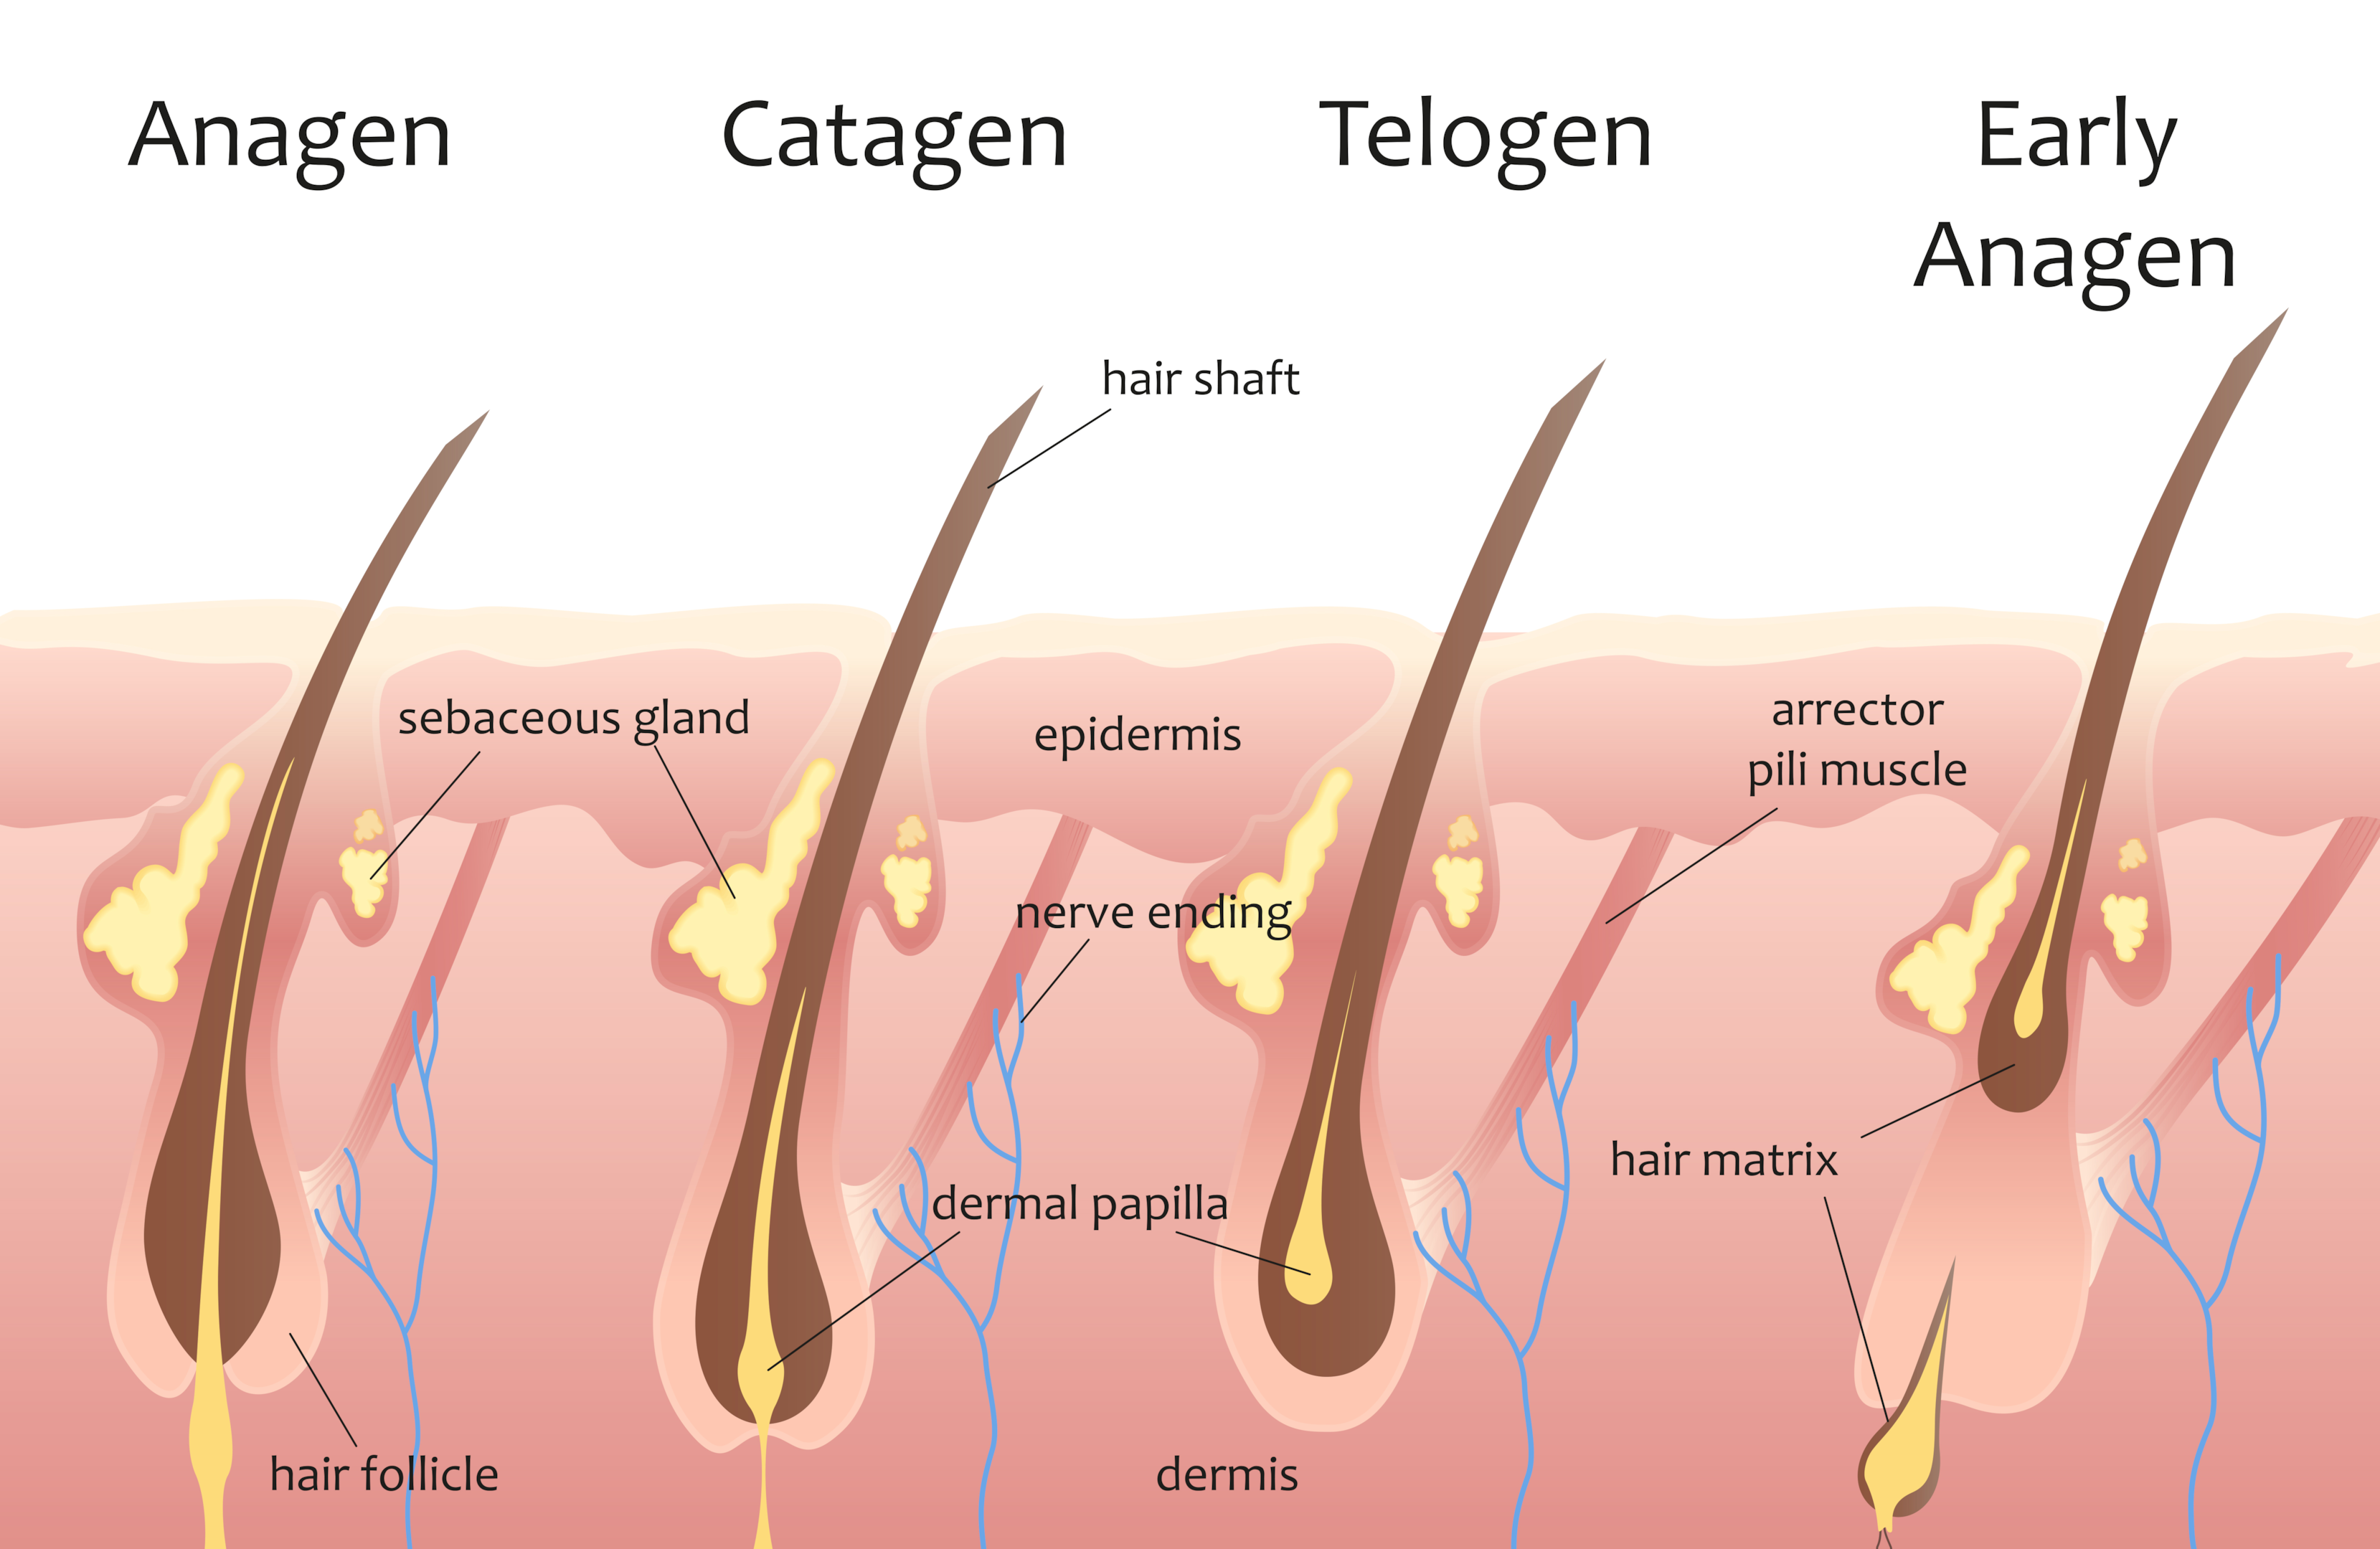 The stages of the hair cycle explained.